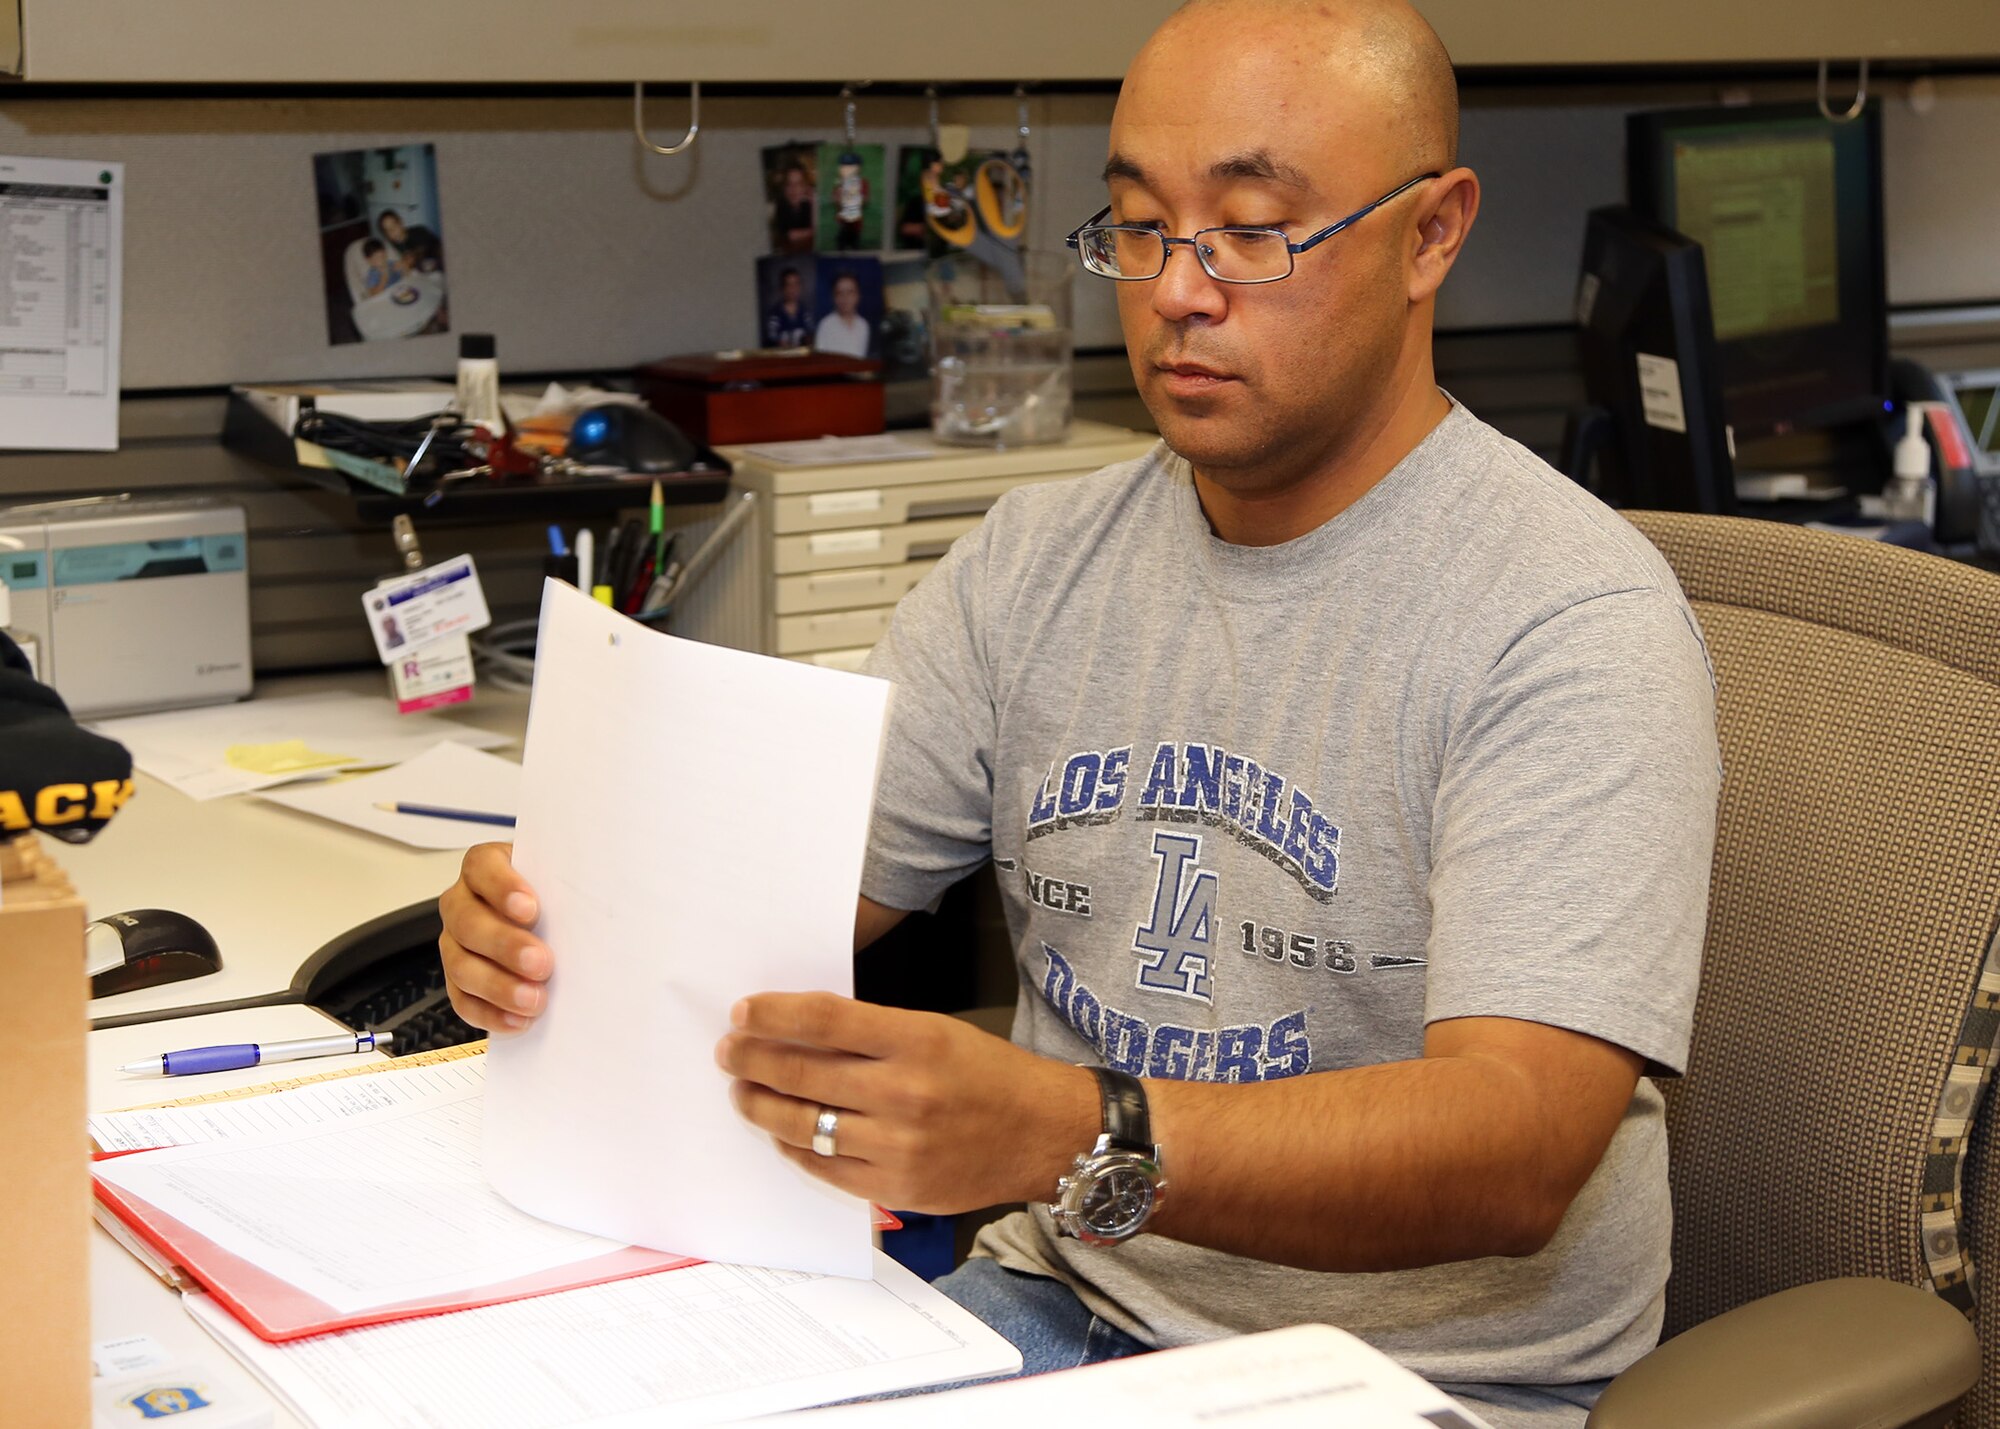 Senior Master Sgt. Richard Griego, a dual-status Air Reserve Technician with the 349th Aerospace Medicine Squadron, reviews Reservists' medical records to ensure deployment readiness, at Travis Air Force Base, Calif., Oct 7, 2013.  Griego was one of the 349th Air Mobility Wing full-time members who returned to work here today. More than 360 of the wing's full-time cadre were idled last week as a part of a furlough of government employees.  ARTs such as Griego maintain status as both Air Force Reservists and Department of Defense civil service employees, ensuring leadership and continuity of Reserve units are provided by Reservists. (U.S. Air Force photo / Lt. Col. Robert Couse-Baker)